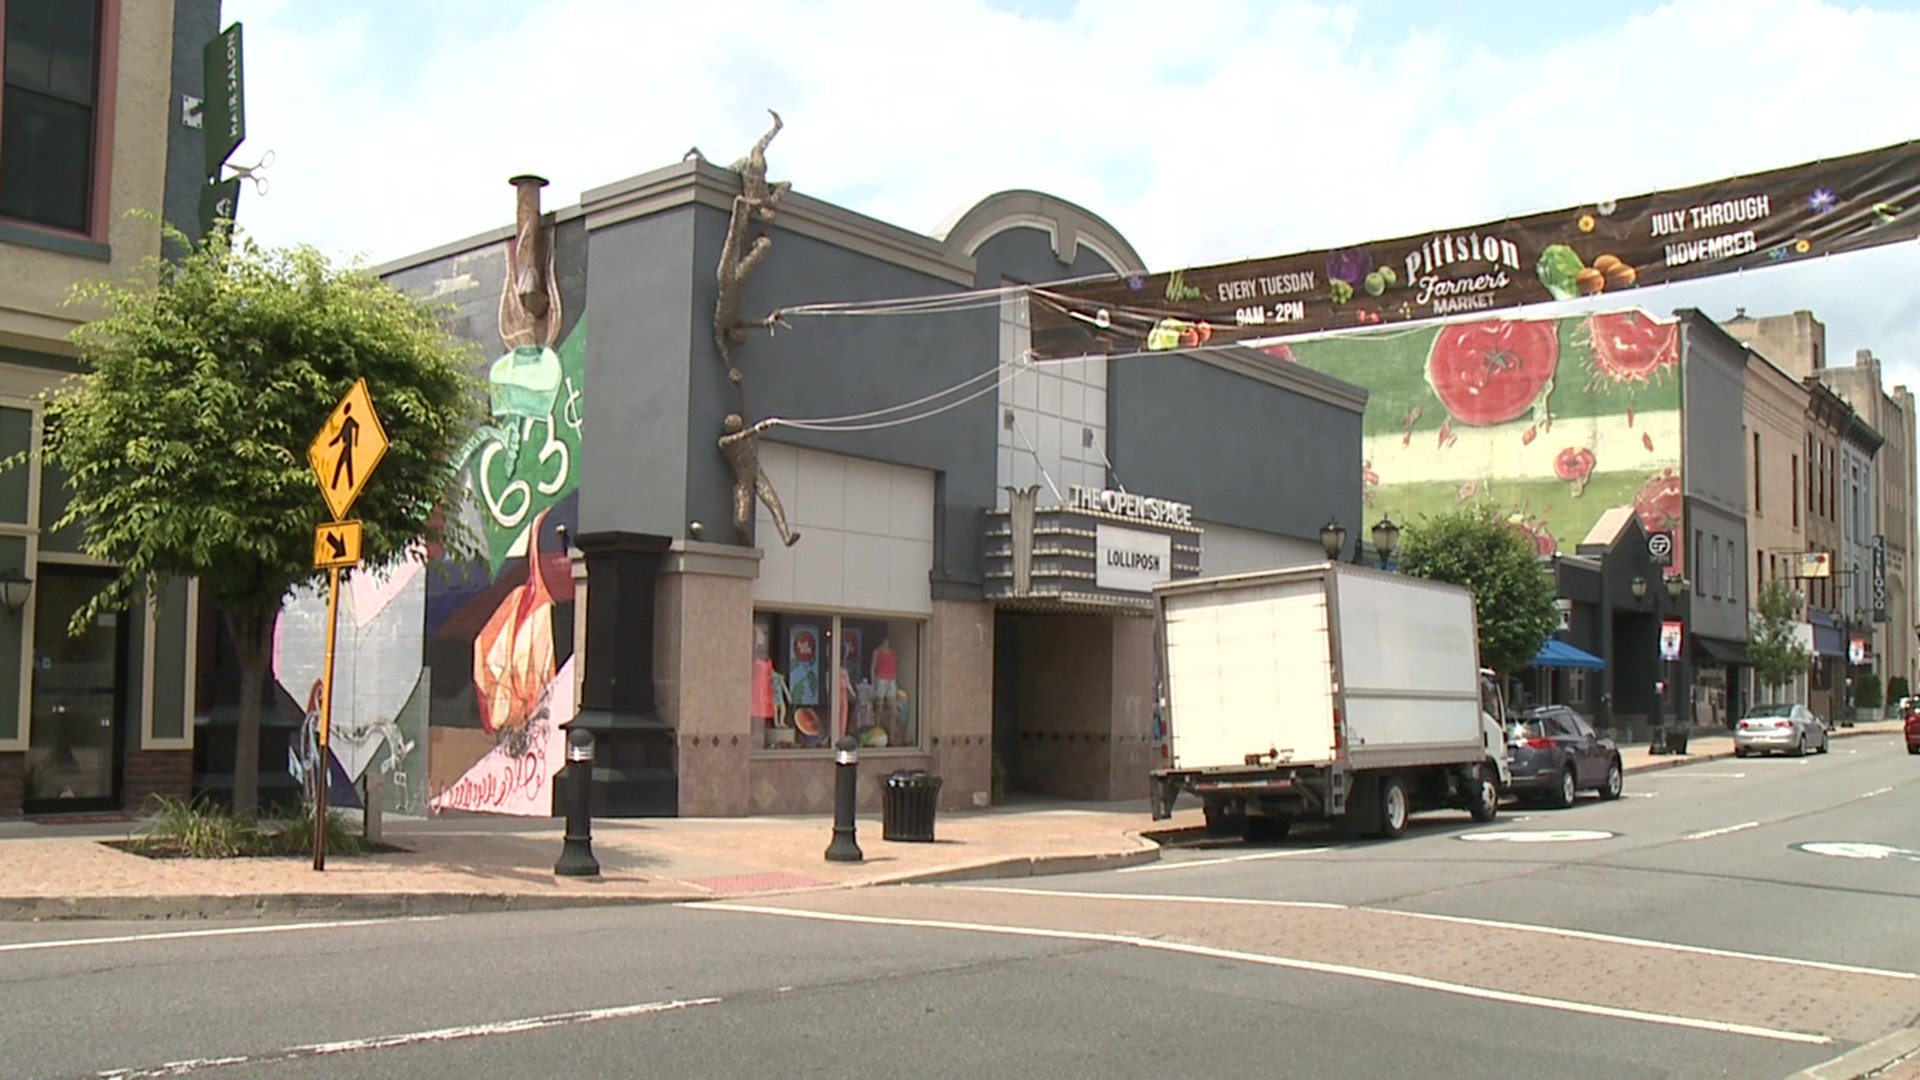 Pittston is getting help from a major brand to build on its commitment to the arts. Newswatch 16's Chelsea Strub has more details.